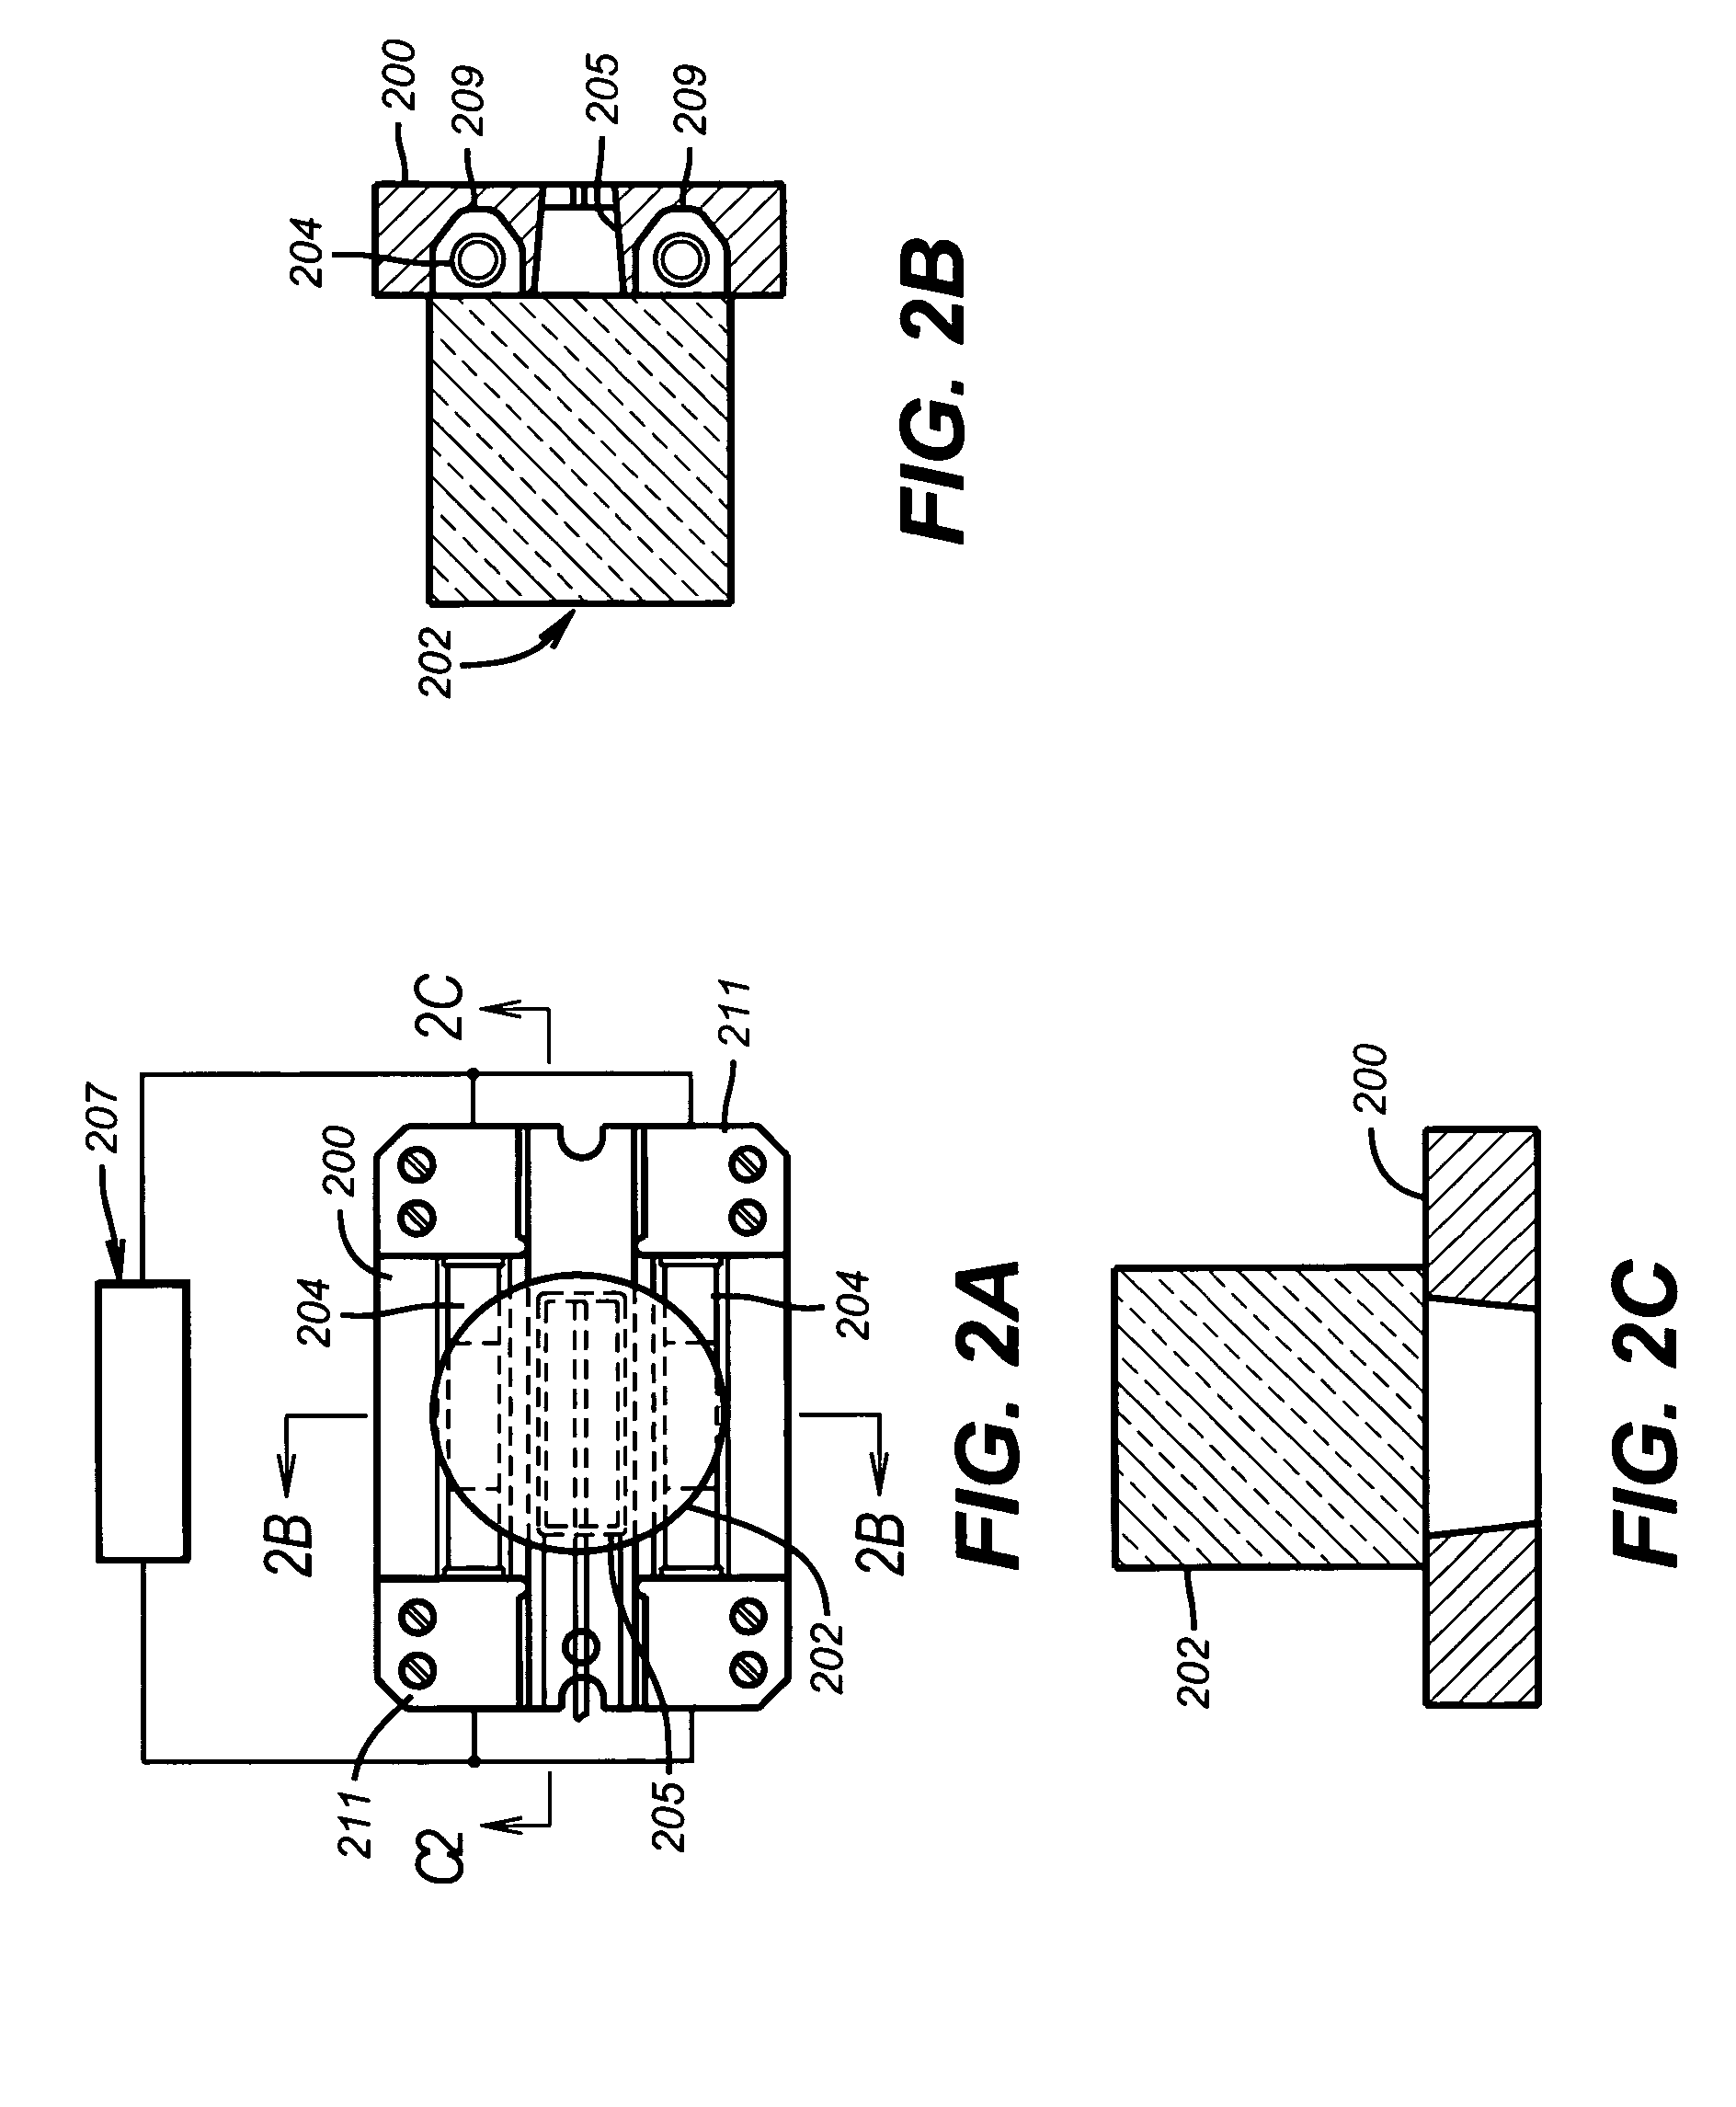 Method and apparatus for a downhole fluorescence spectrometer